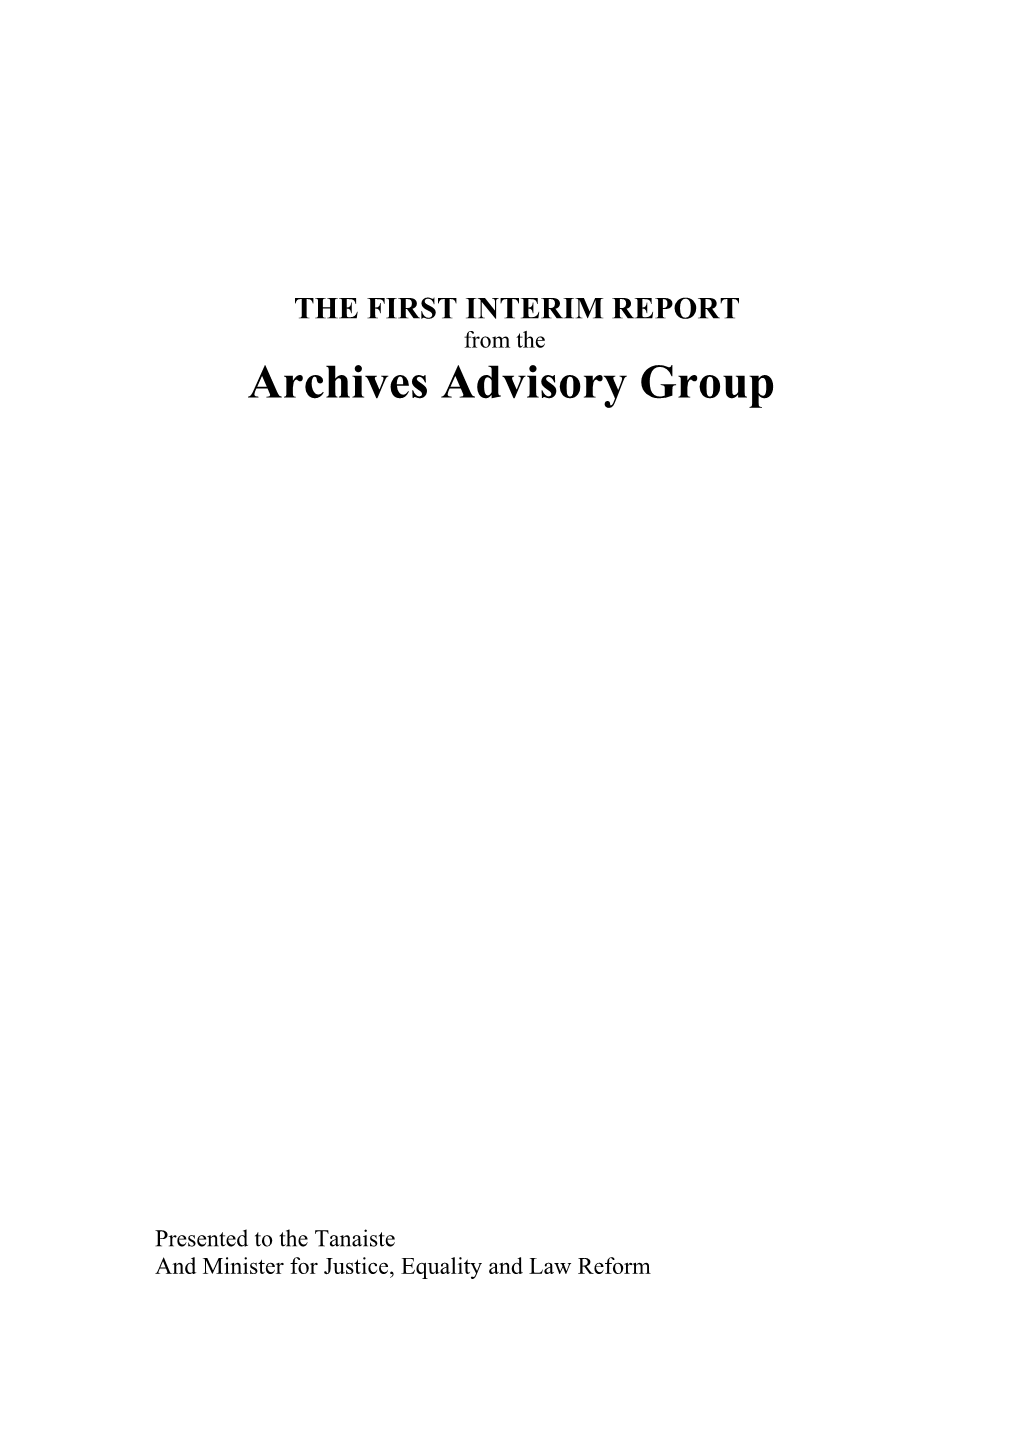 First Interim Report of the Archives Advisory Group